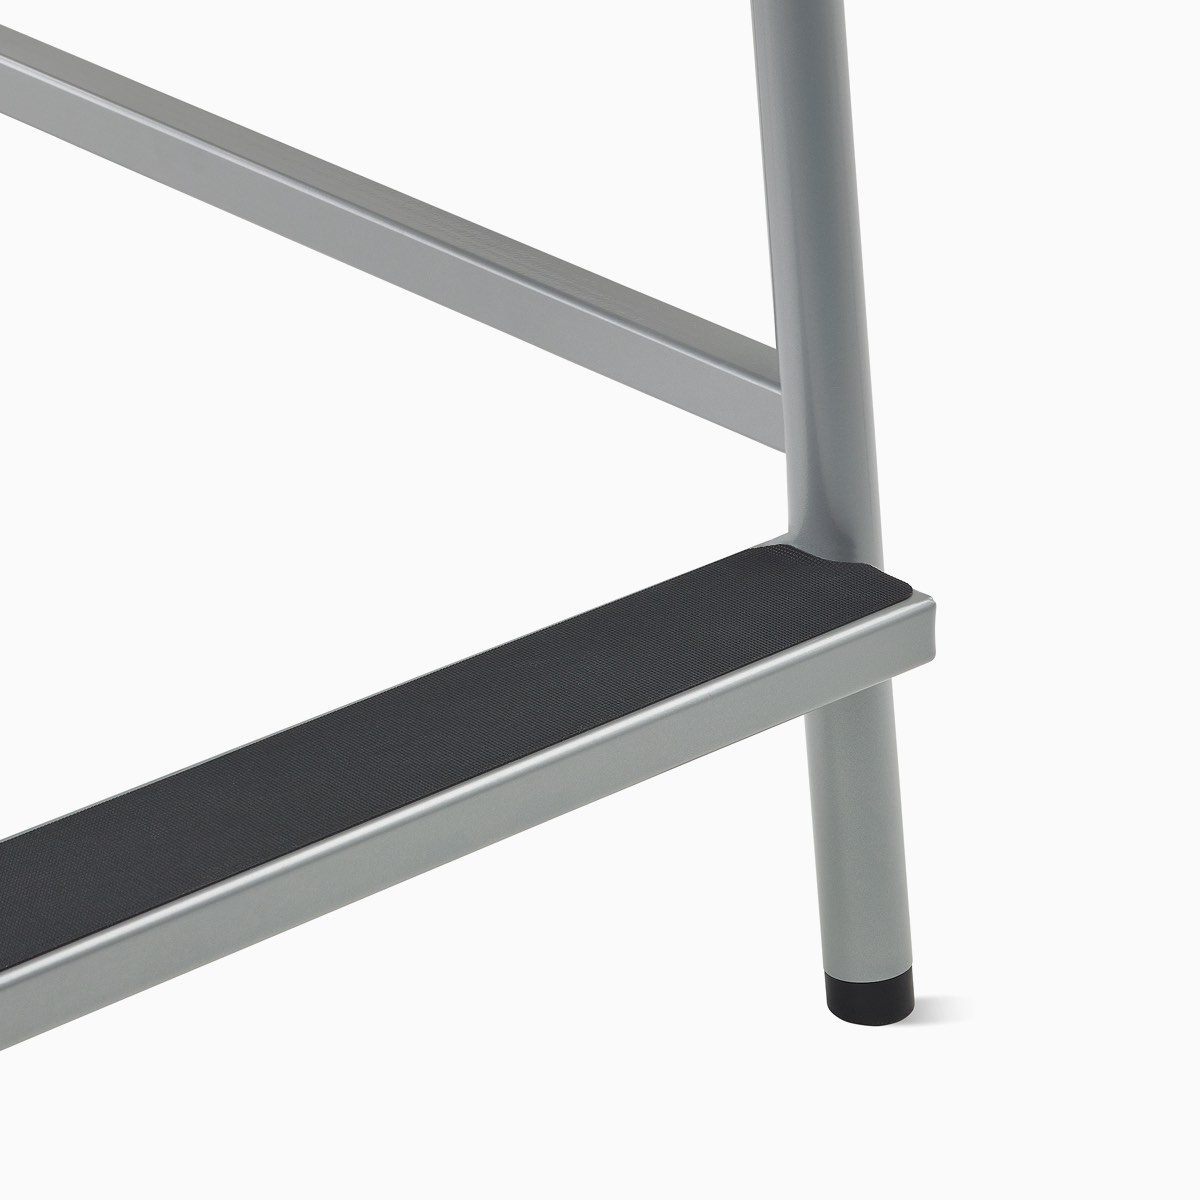 Detail of the footrest on a Valor Easy Access Chair with a silver frame and black grip on the footrest.